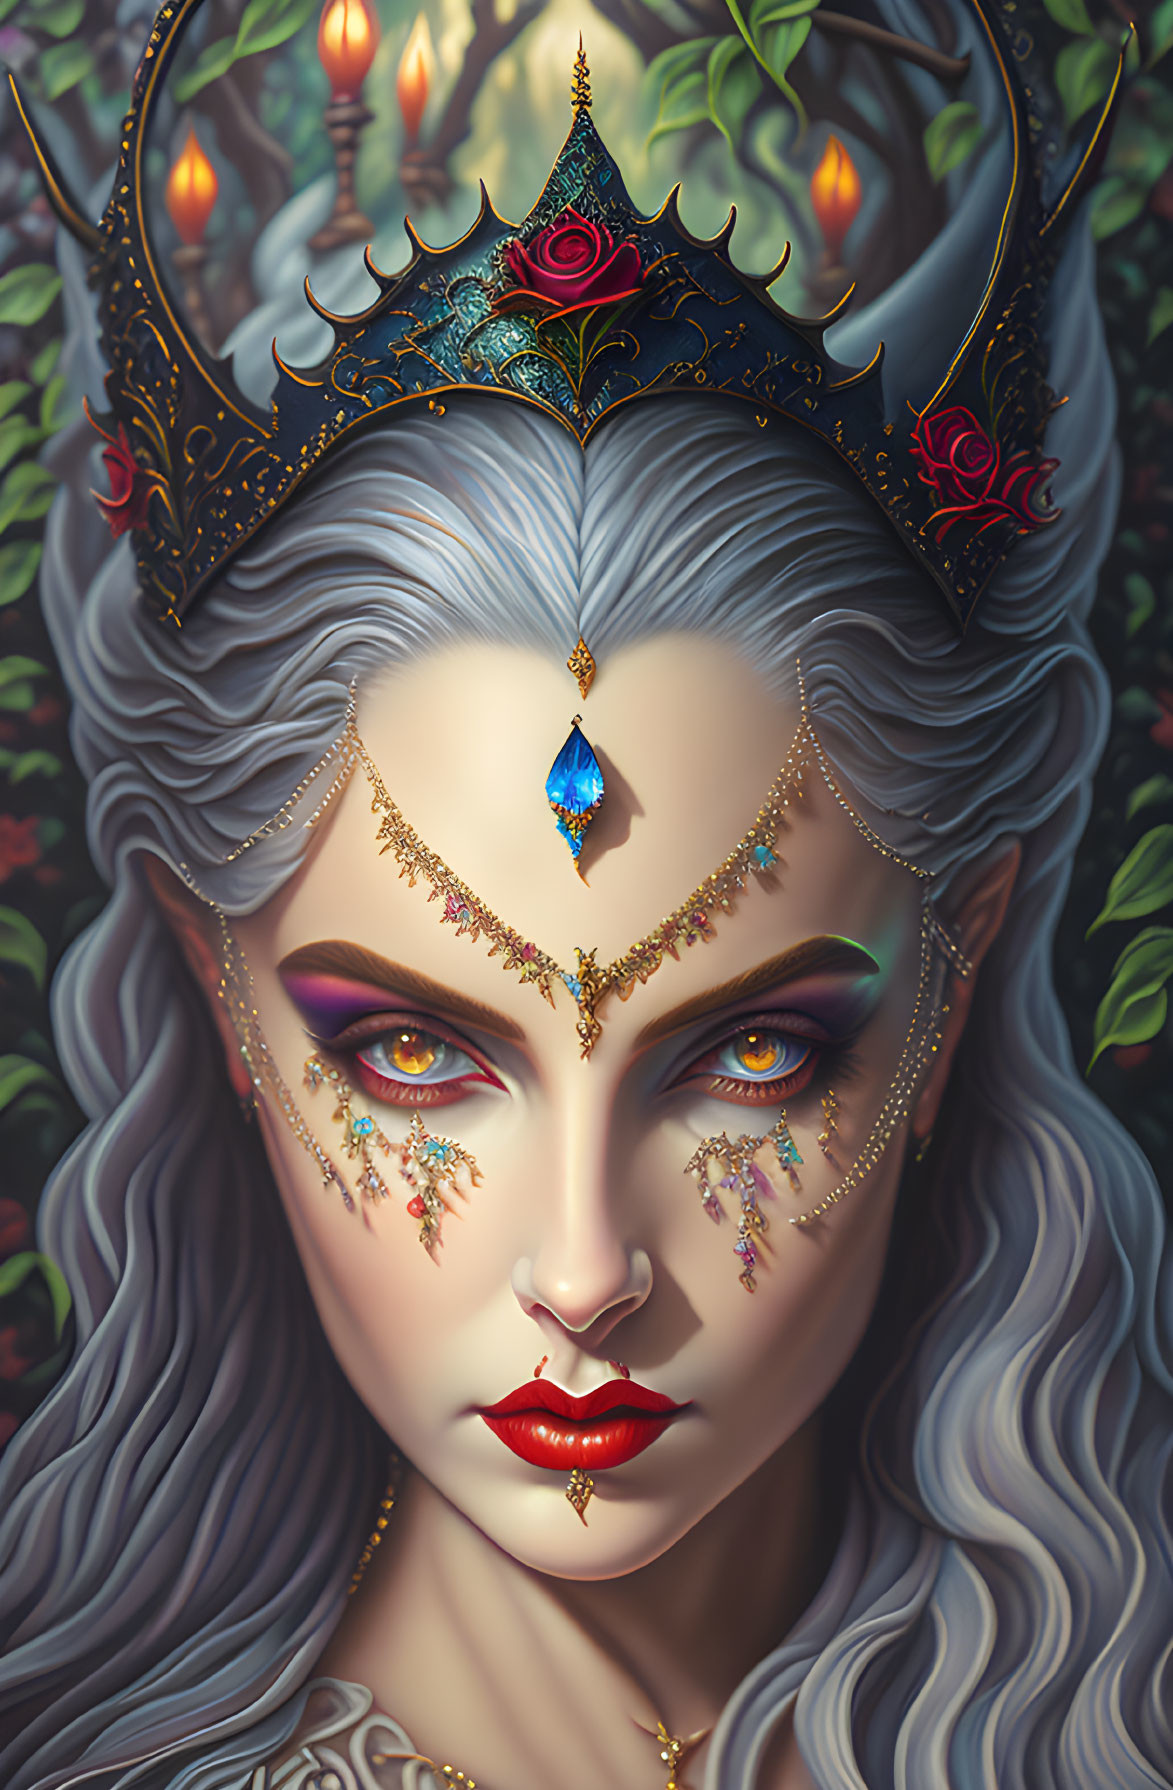 Regal woman with white hair, crown, red eyes, gold jewelry, blue gemstone